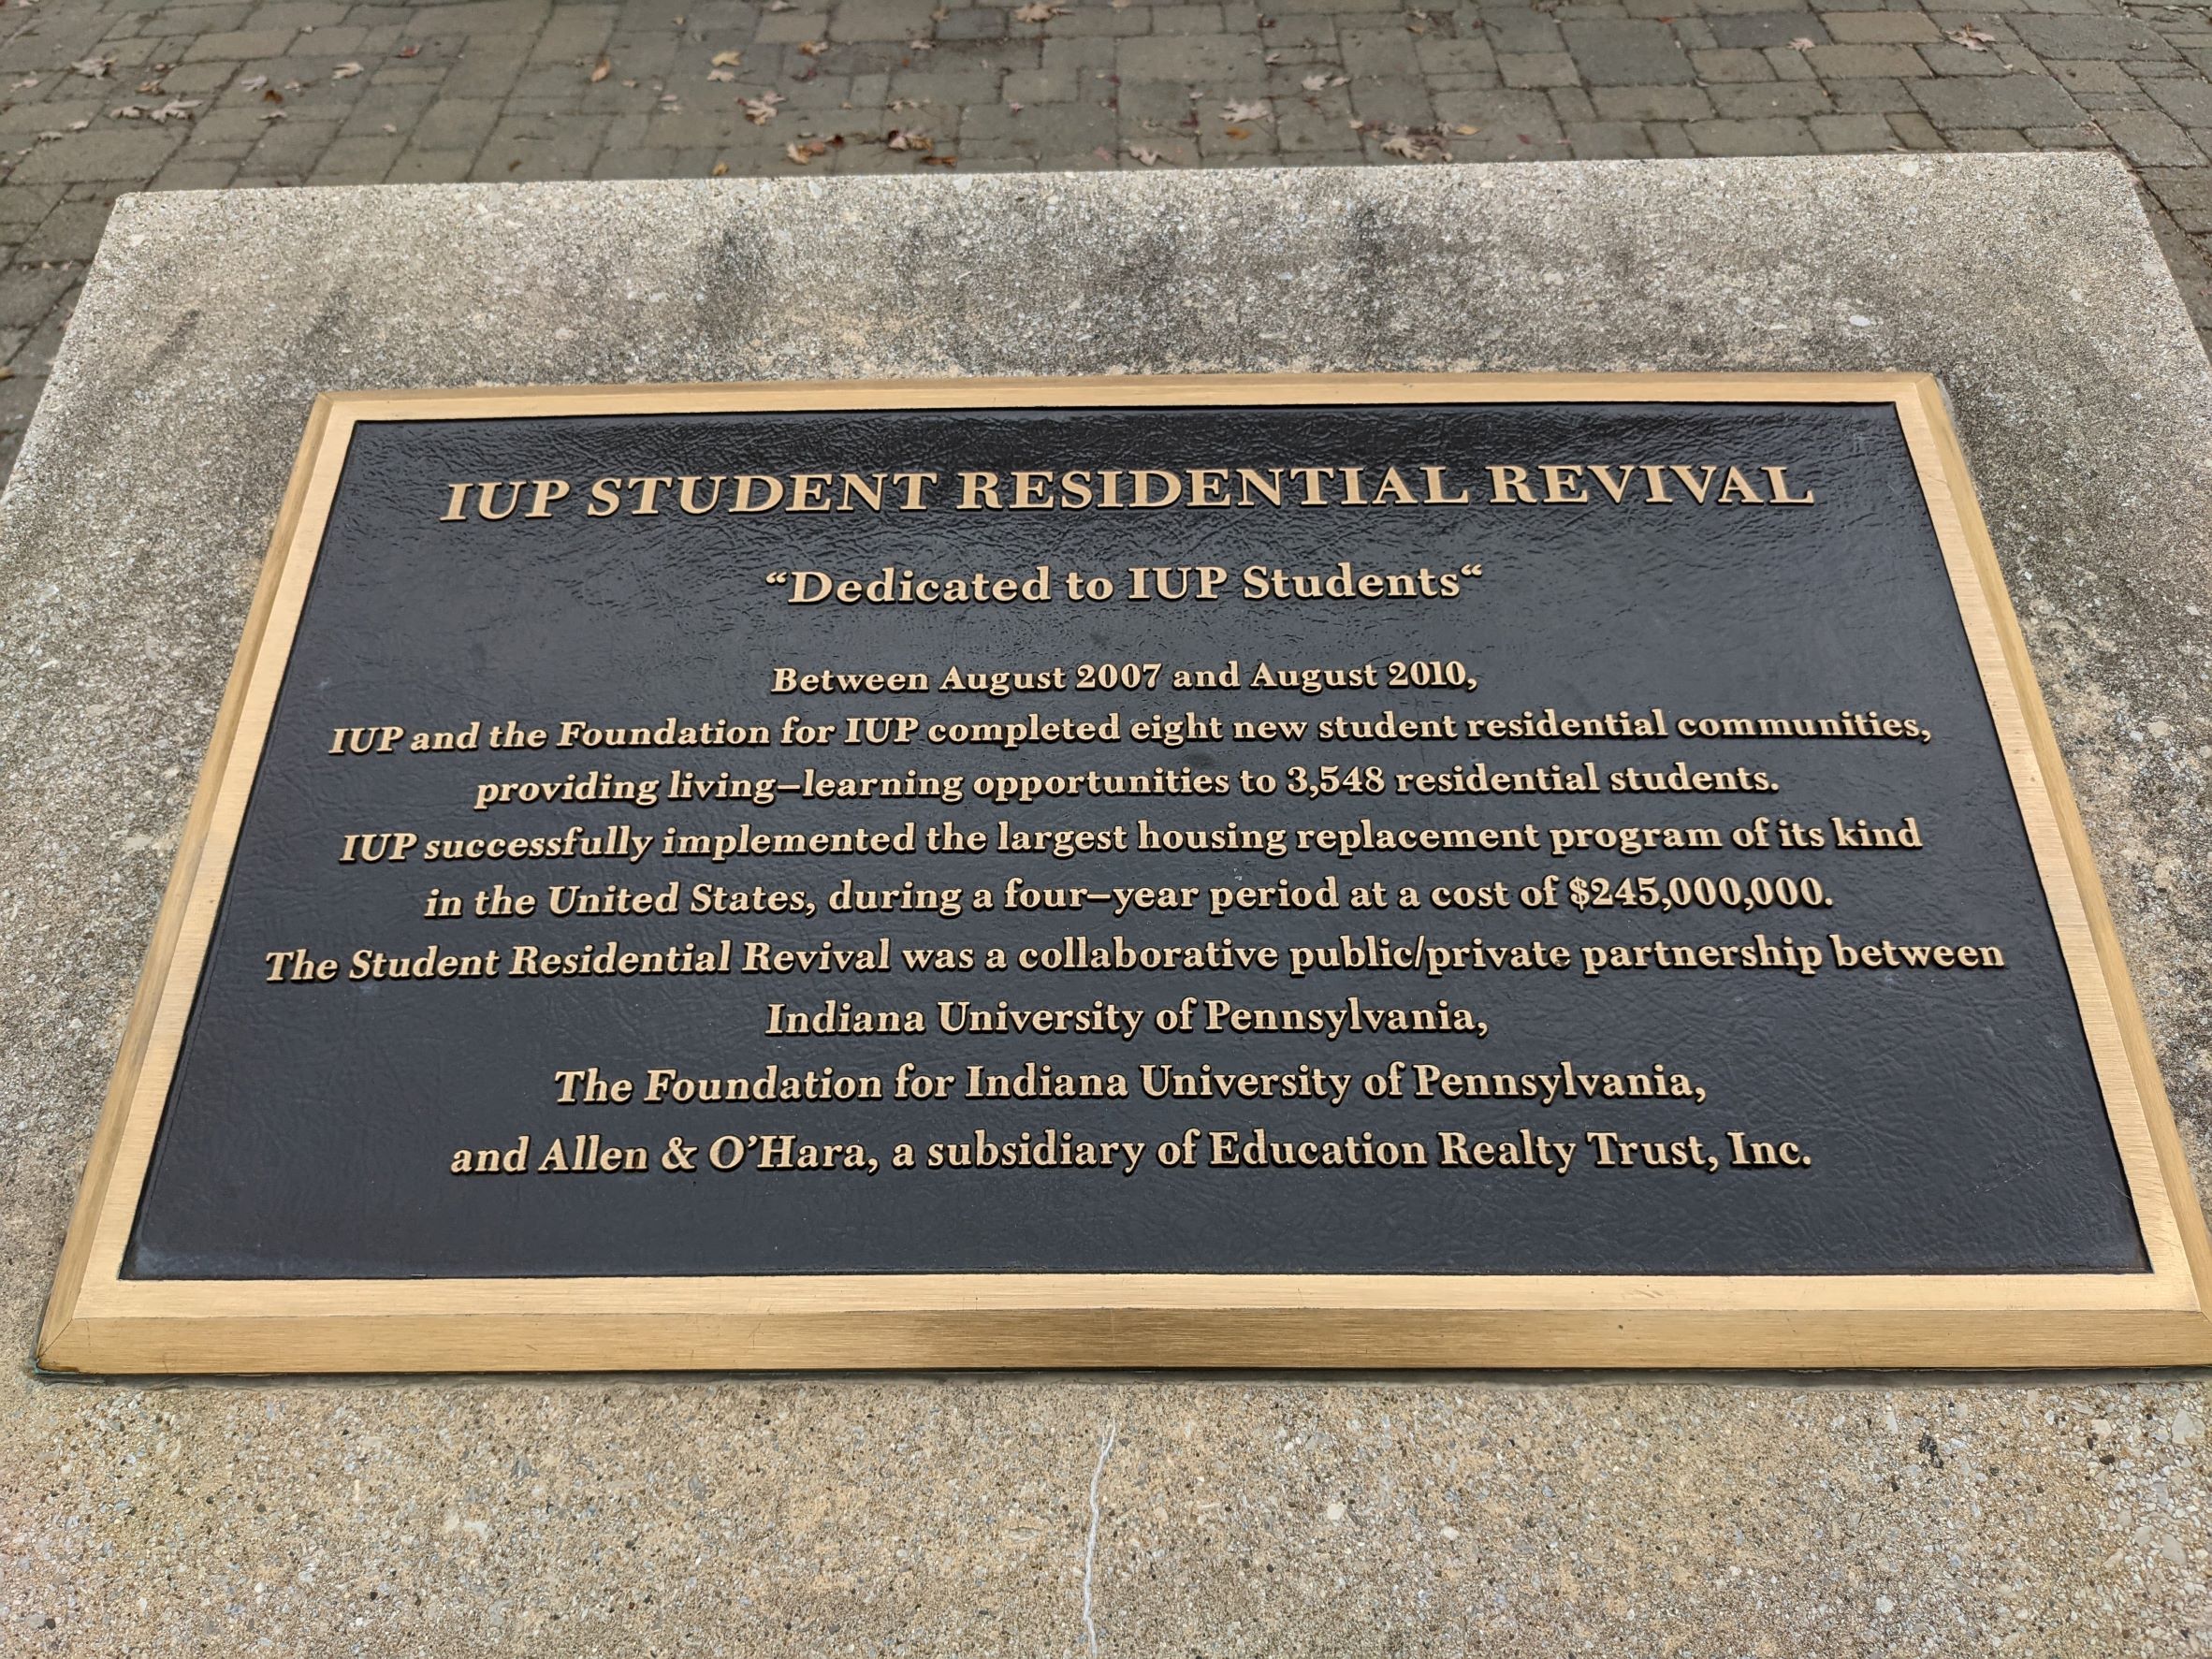 Plaque commemorating the largest on-campus student housing replacement project of its type in the United States - the Residential Revival at IUP